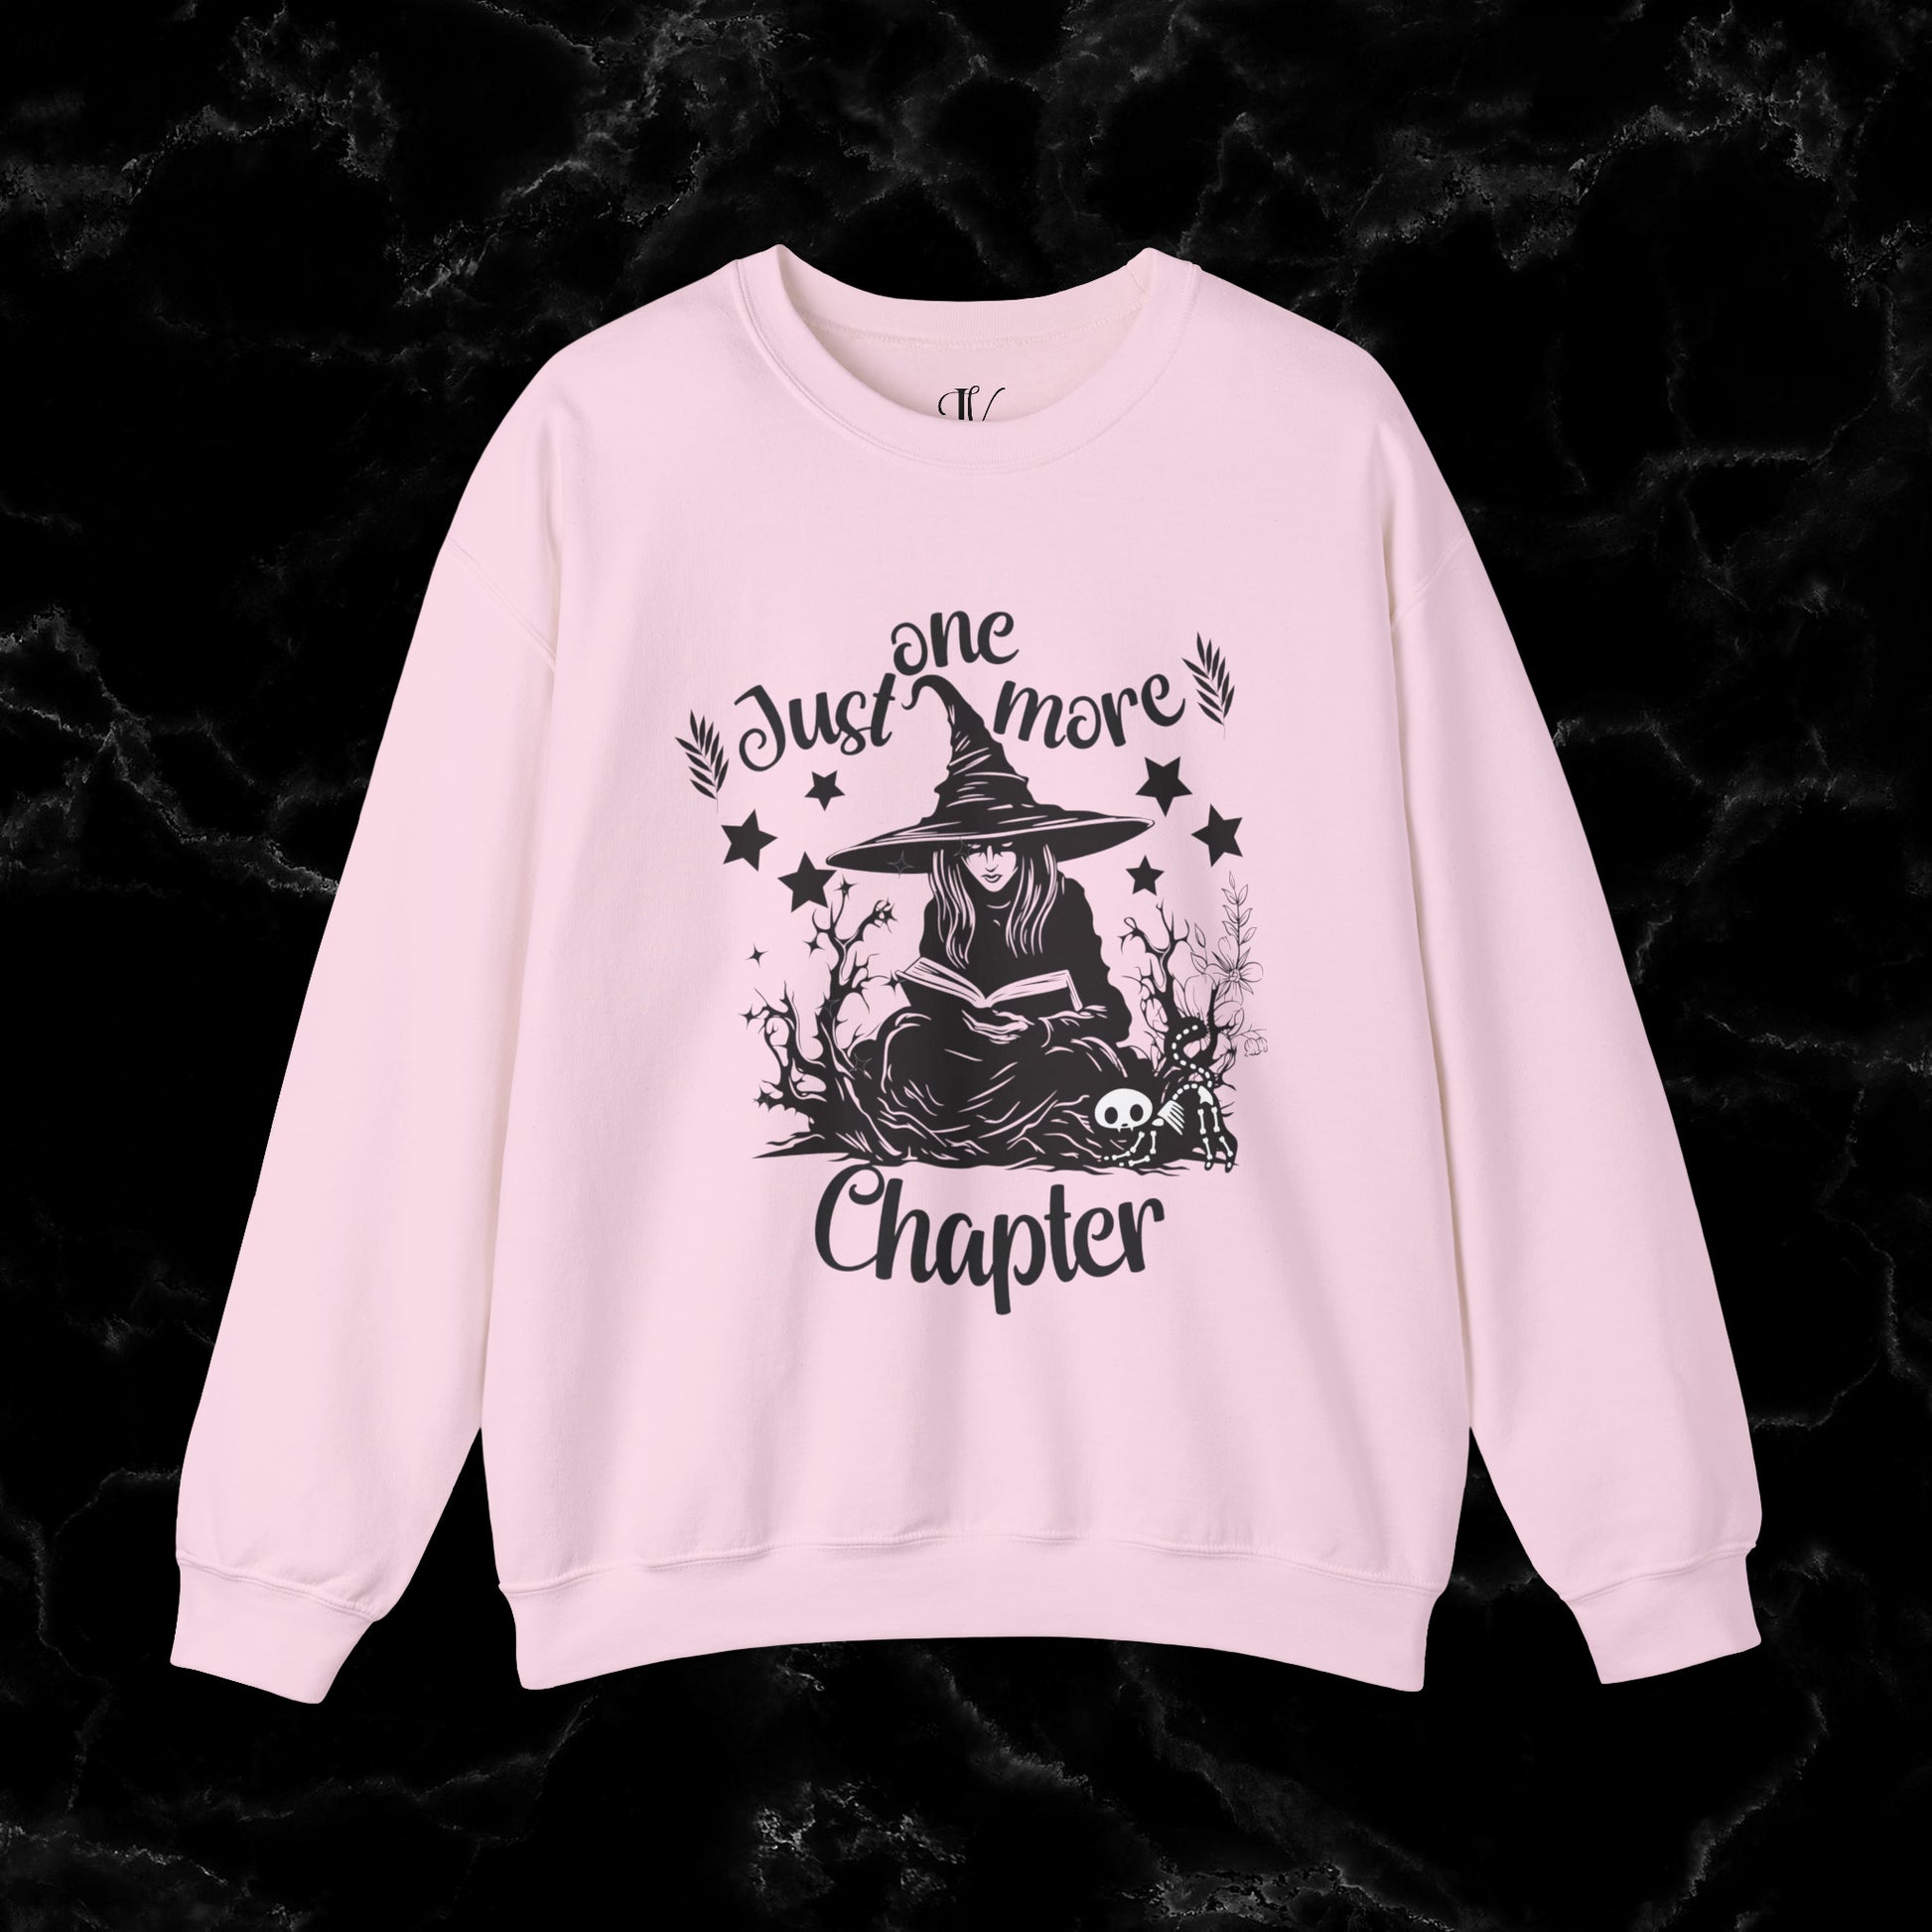 One More Chapter Sweatshirt - Book Lover Gift, Librarian Shirt, Reading Witch - Cozy Sweatshirt for Book Lovers Halloween Sweatshirt S Light Pink 